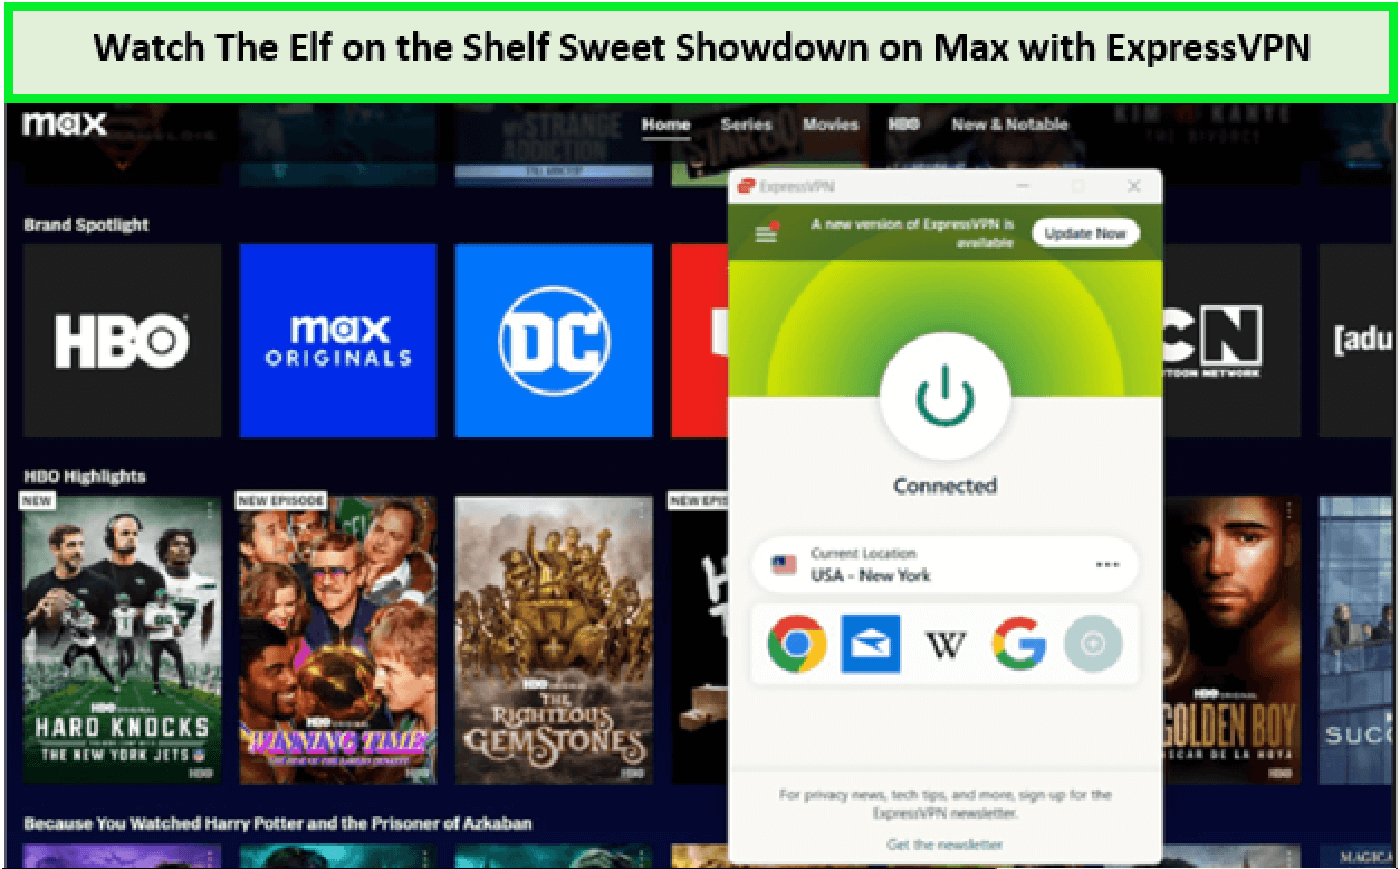 Watch-The-Elf-on-the-Shelf-Sweet-Showdown-in-Netherlands-on-Max-with-ExpressVPN